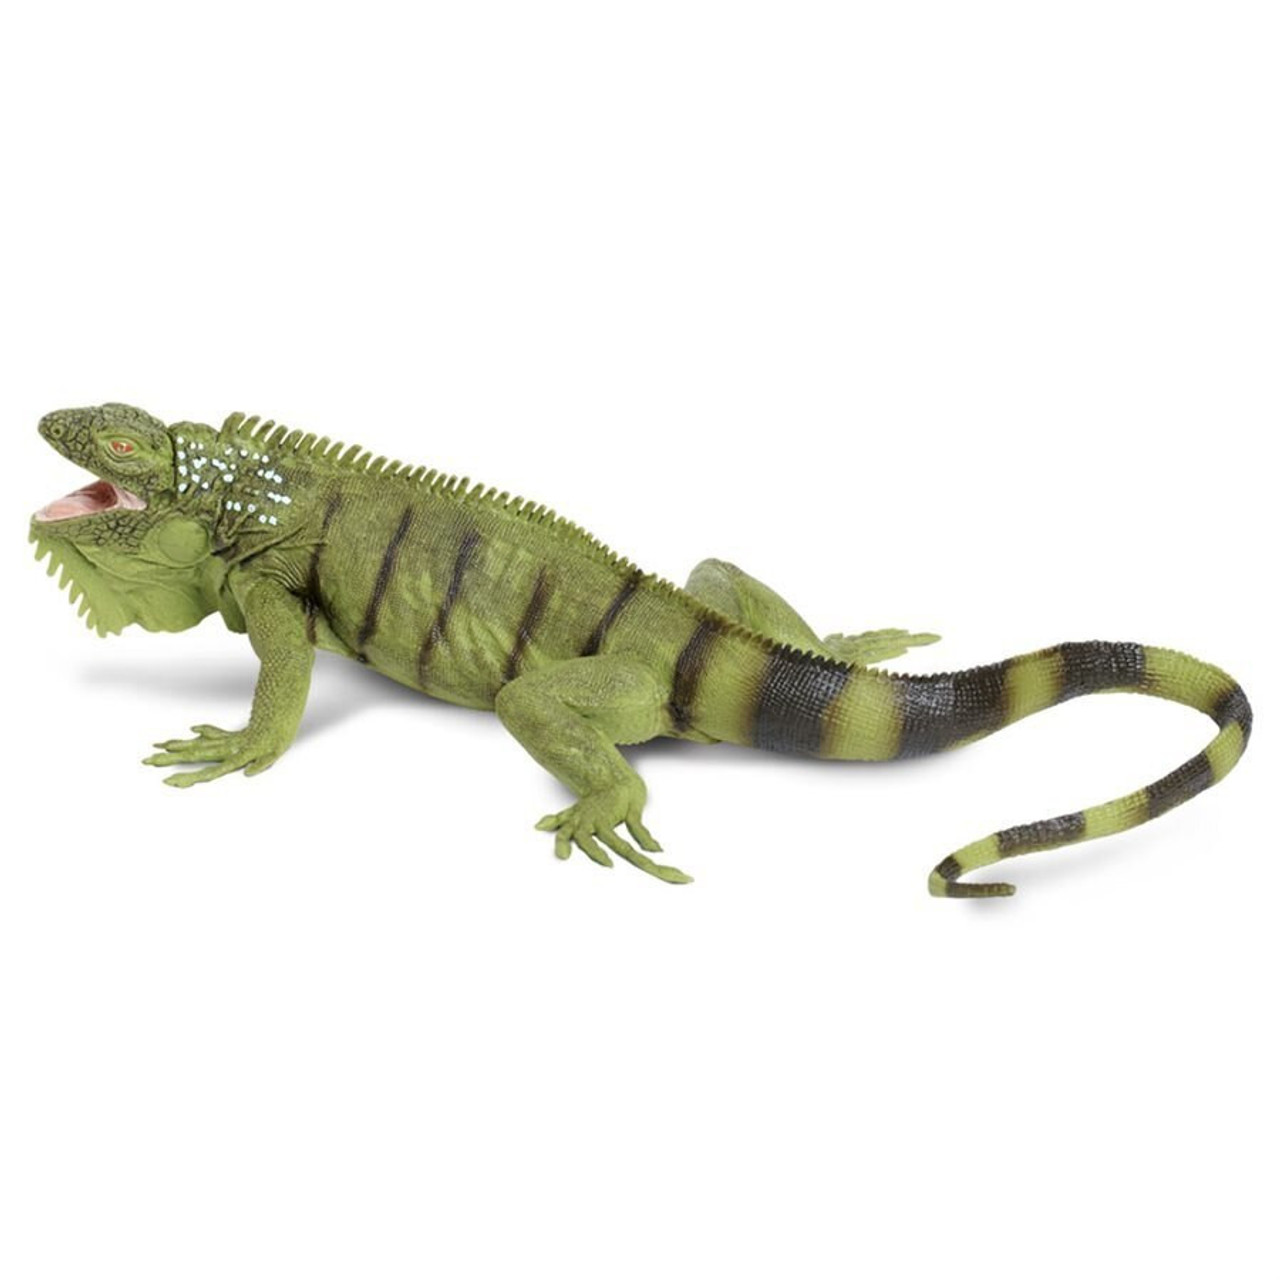 Digital Pocket Scale 1000 gram x 0.1 gram - The Tye-Dyed Iguana - Reptiles  and Reptile Supplies in St. Louis.